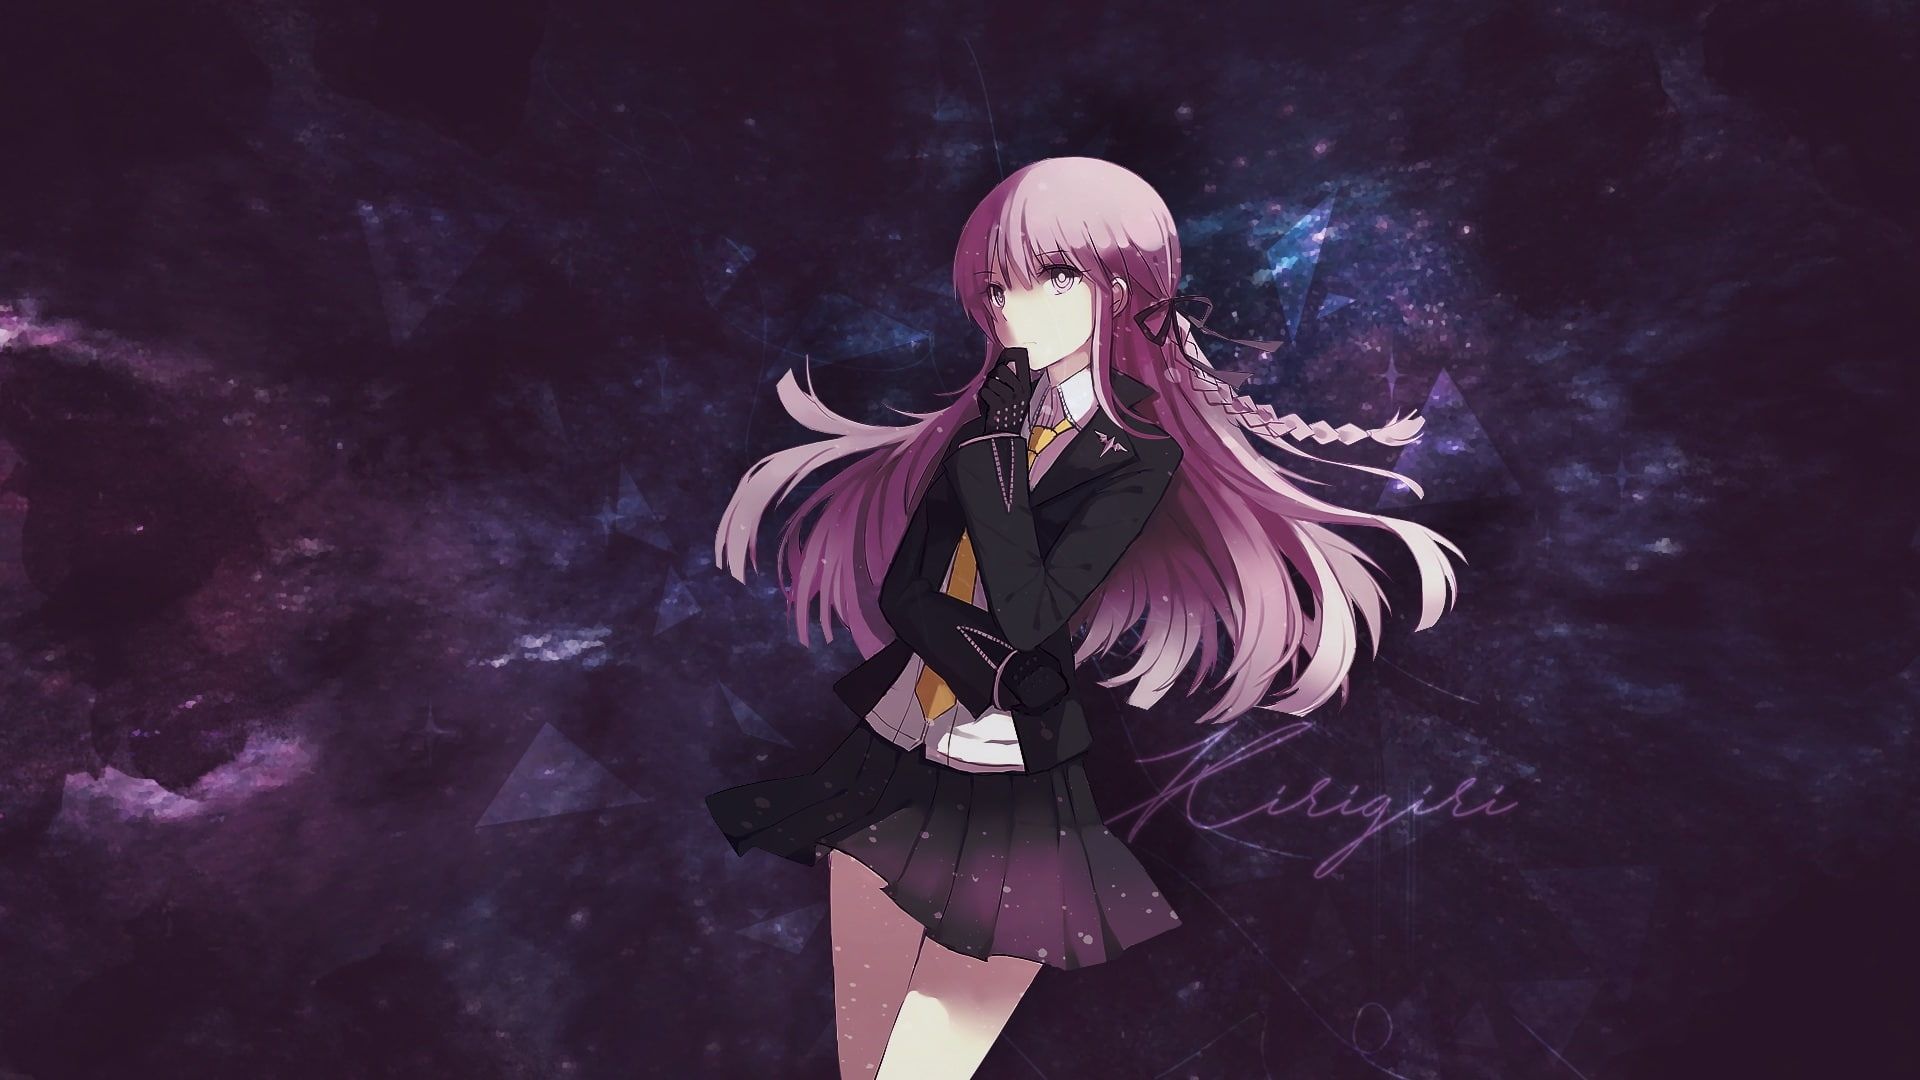 A girl with purple hair and black clothes - Danganronpa